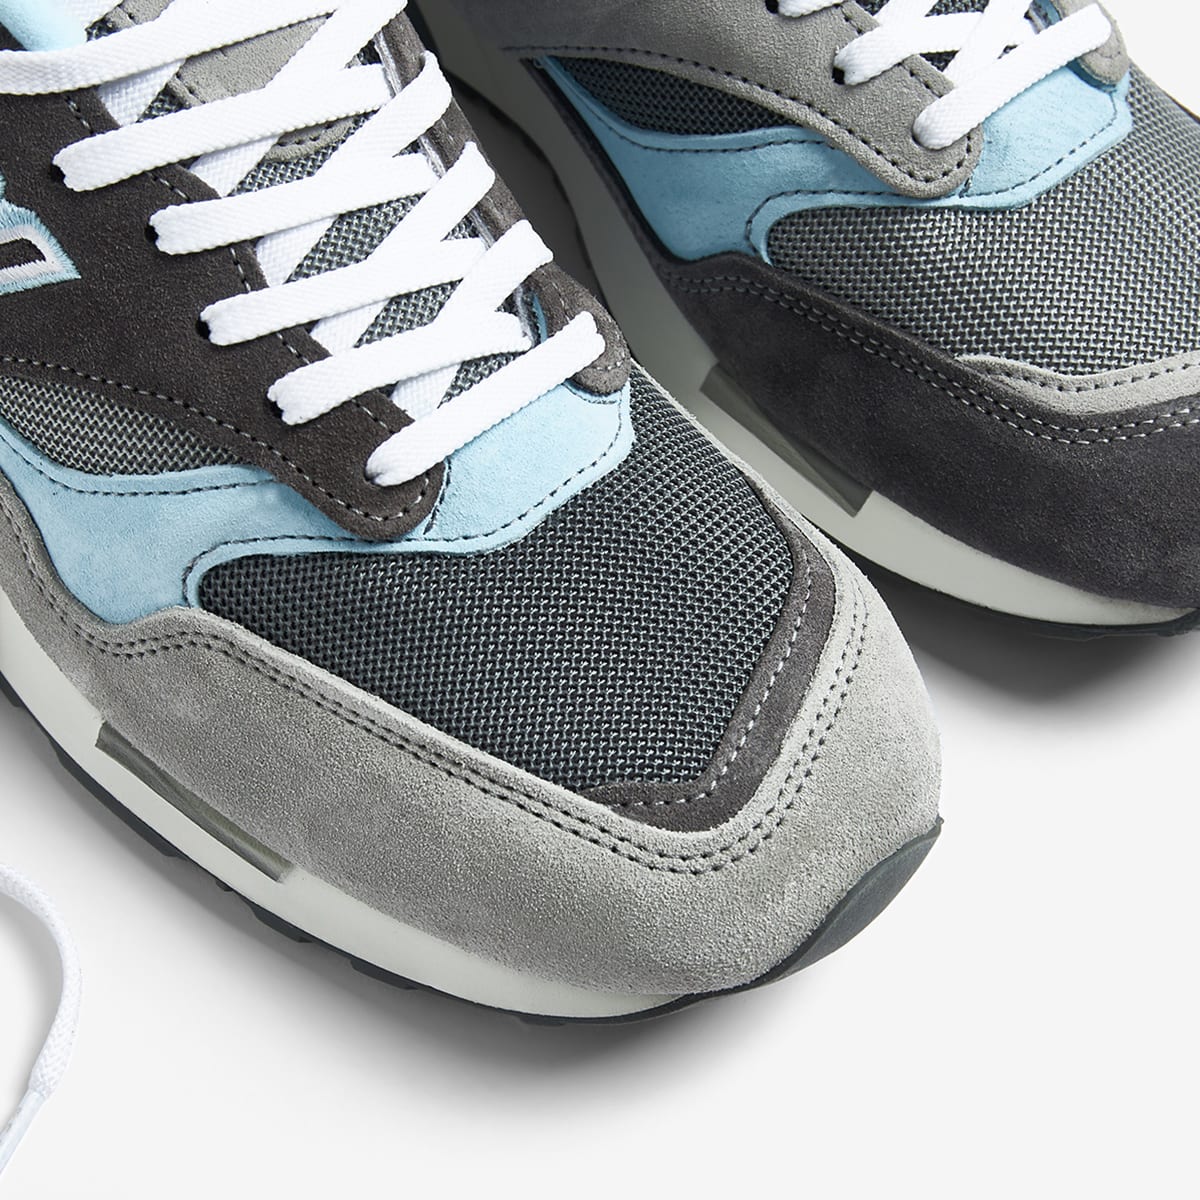 New Balance x Beams x Paperboy M1500BMS (Grey) | END. Launches